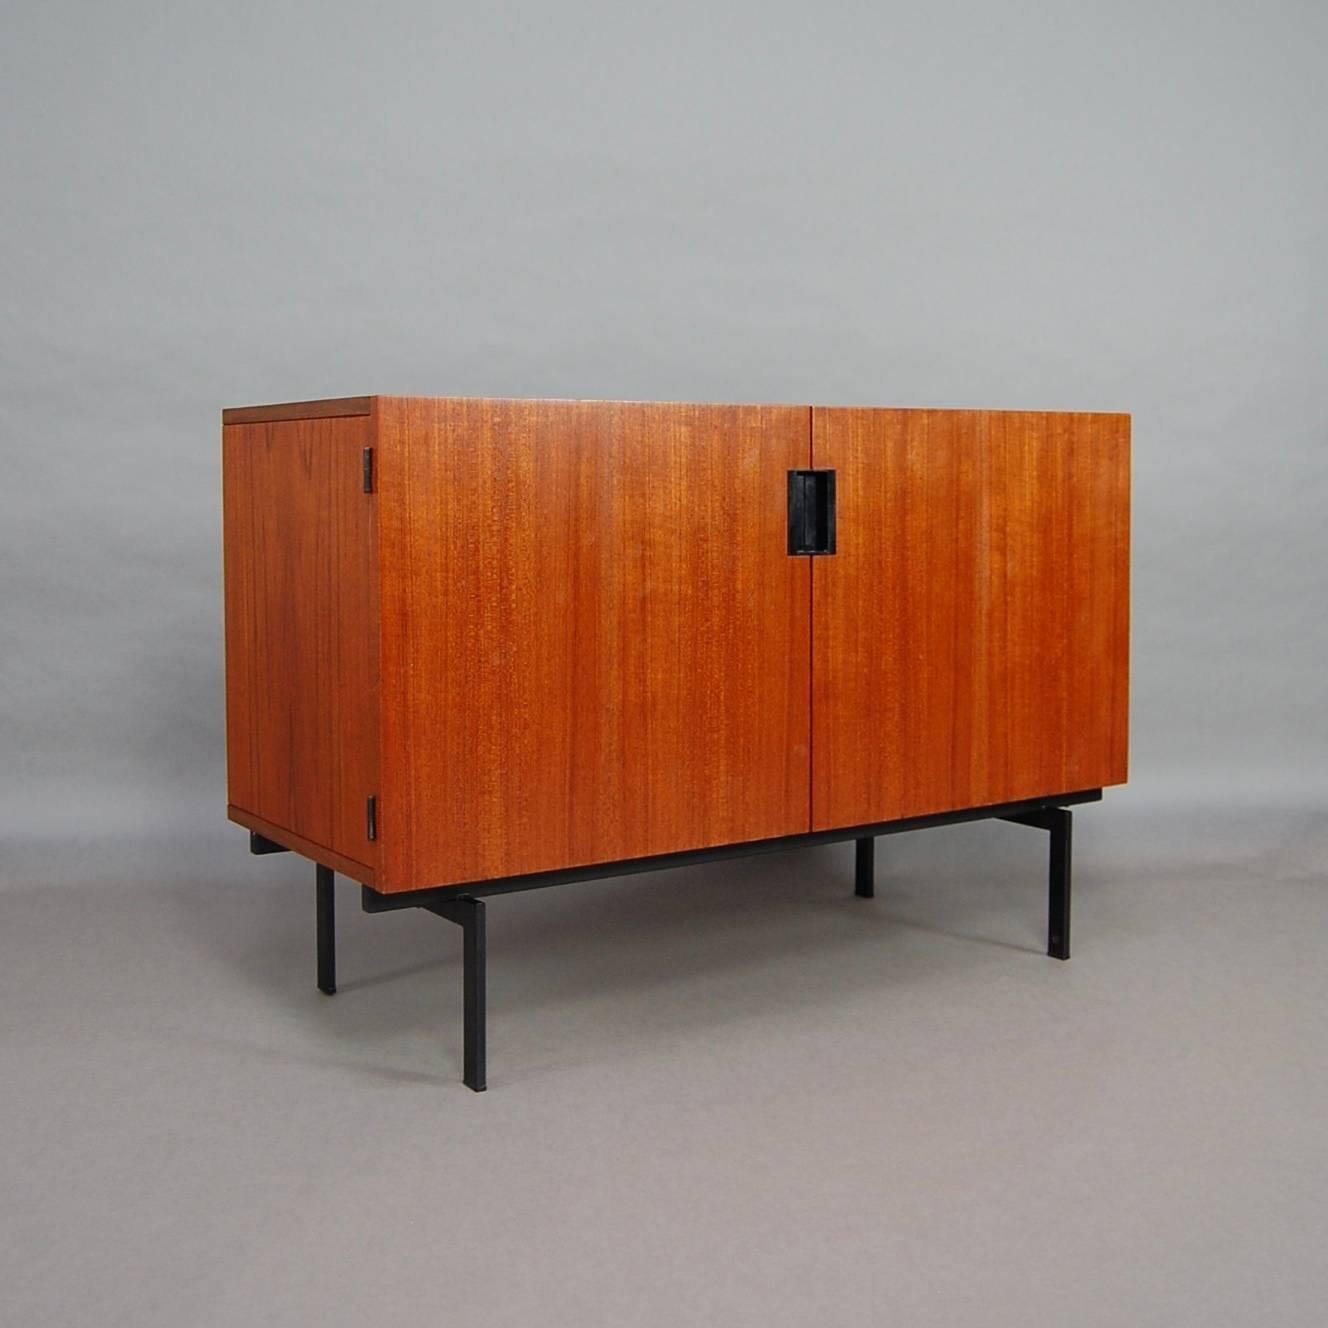 This very nice small sideboard was designed by Cees Braakman in 1958 for Pastoe. It is made of teak veneer and is in very good condition (only a superficial scratch on top).
The base is made of black lacquered metal.
It still has the Pastoe label.